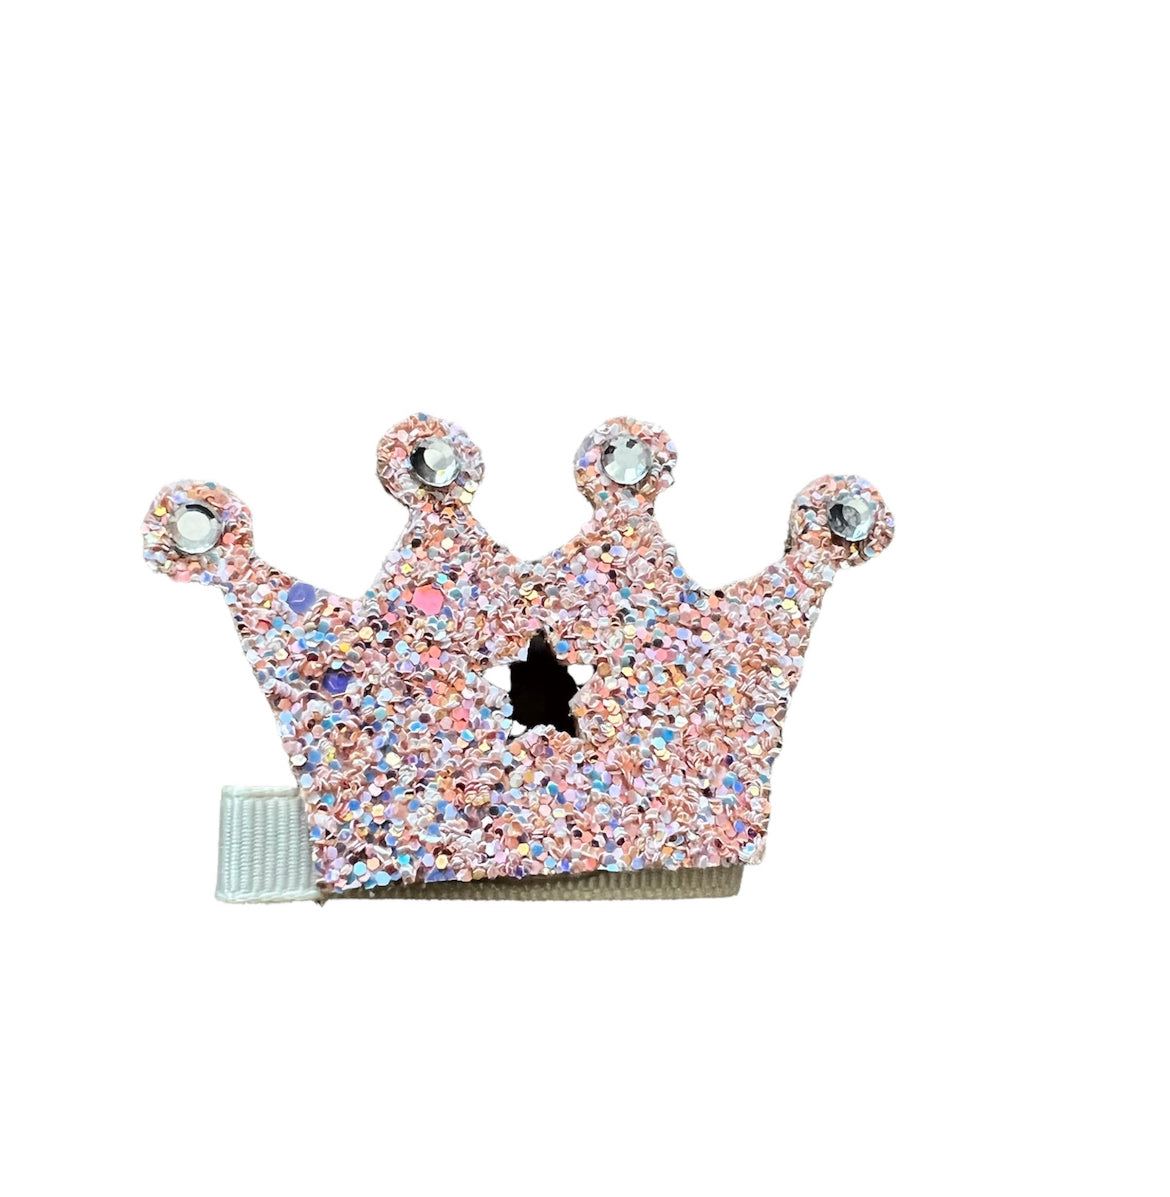 Peach Crown Glitter Leather Hairclips